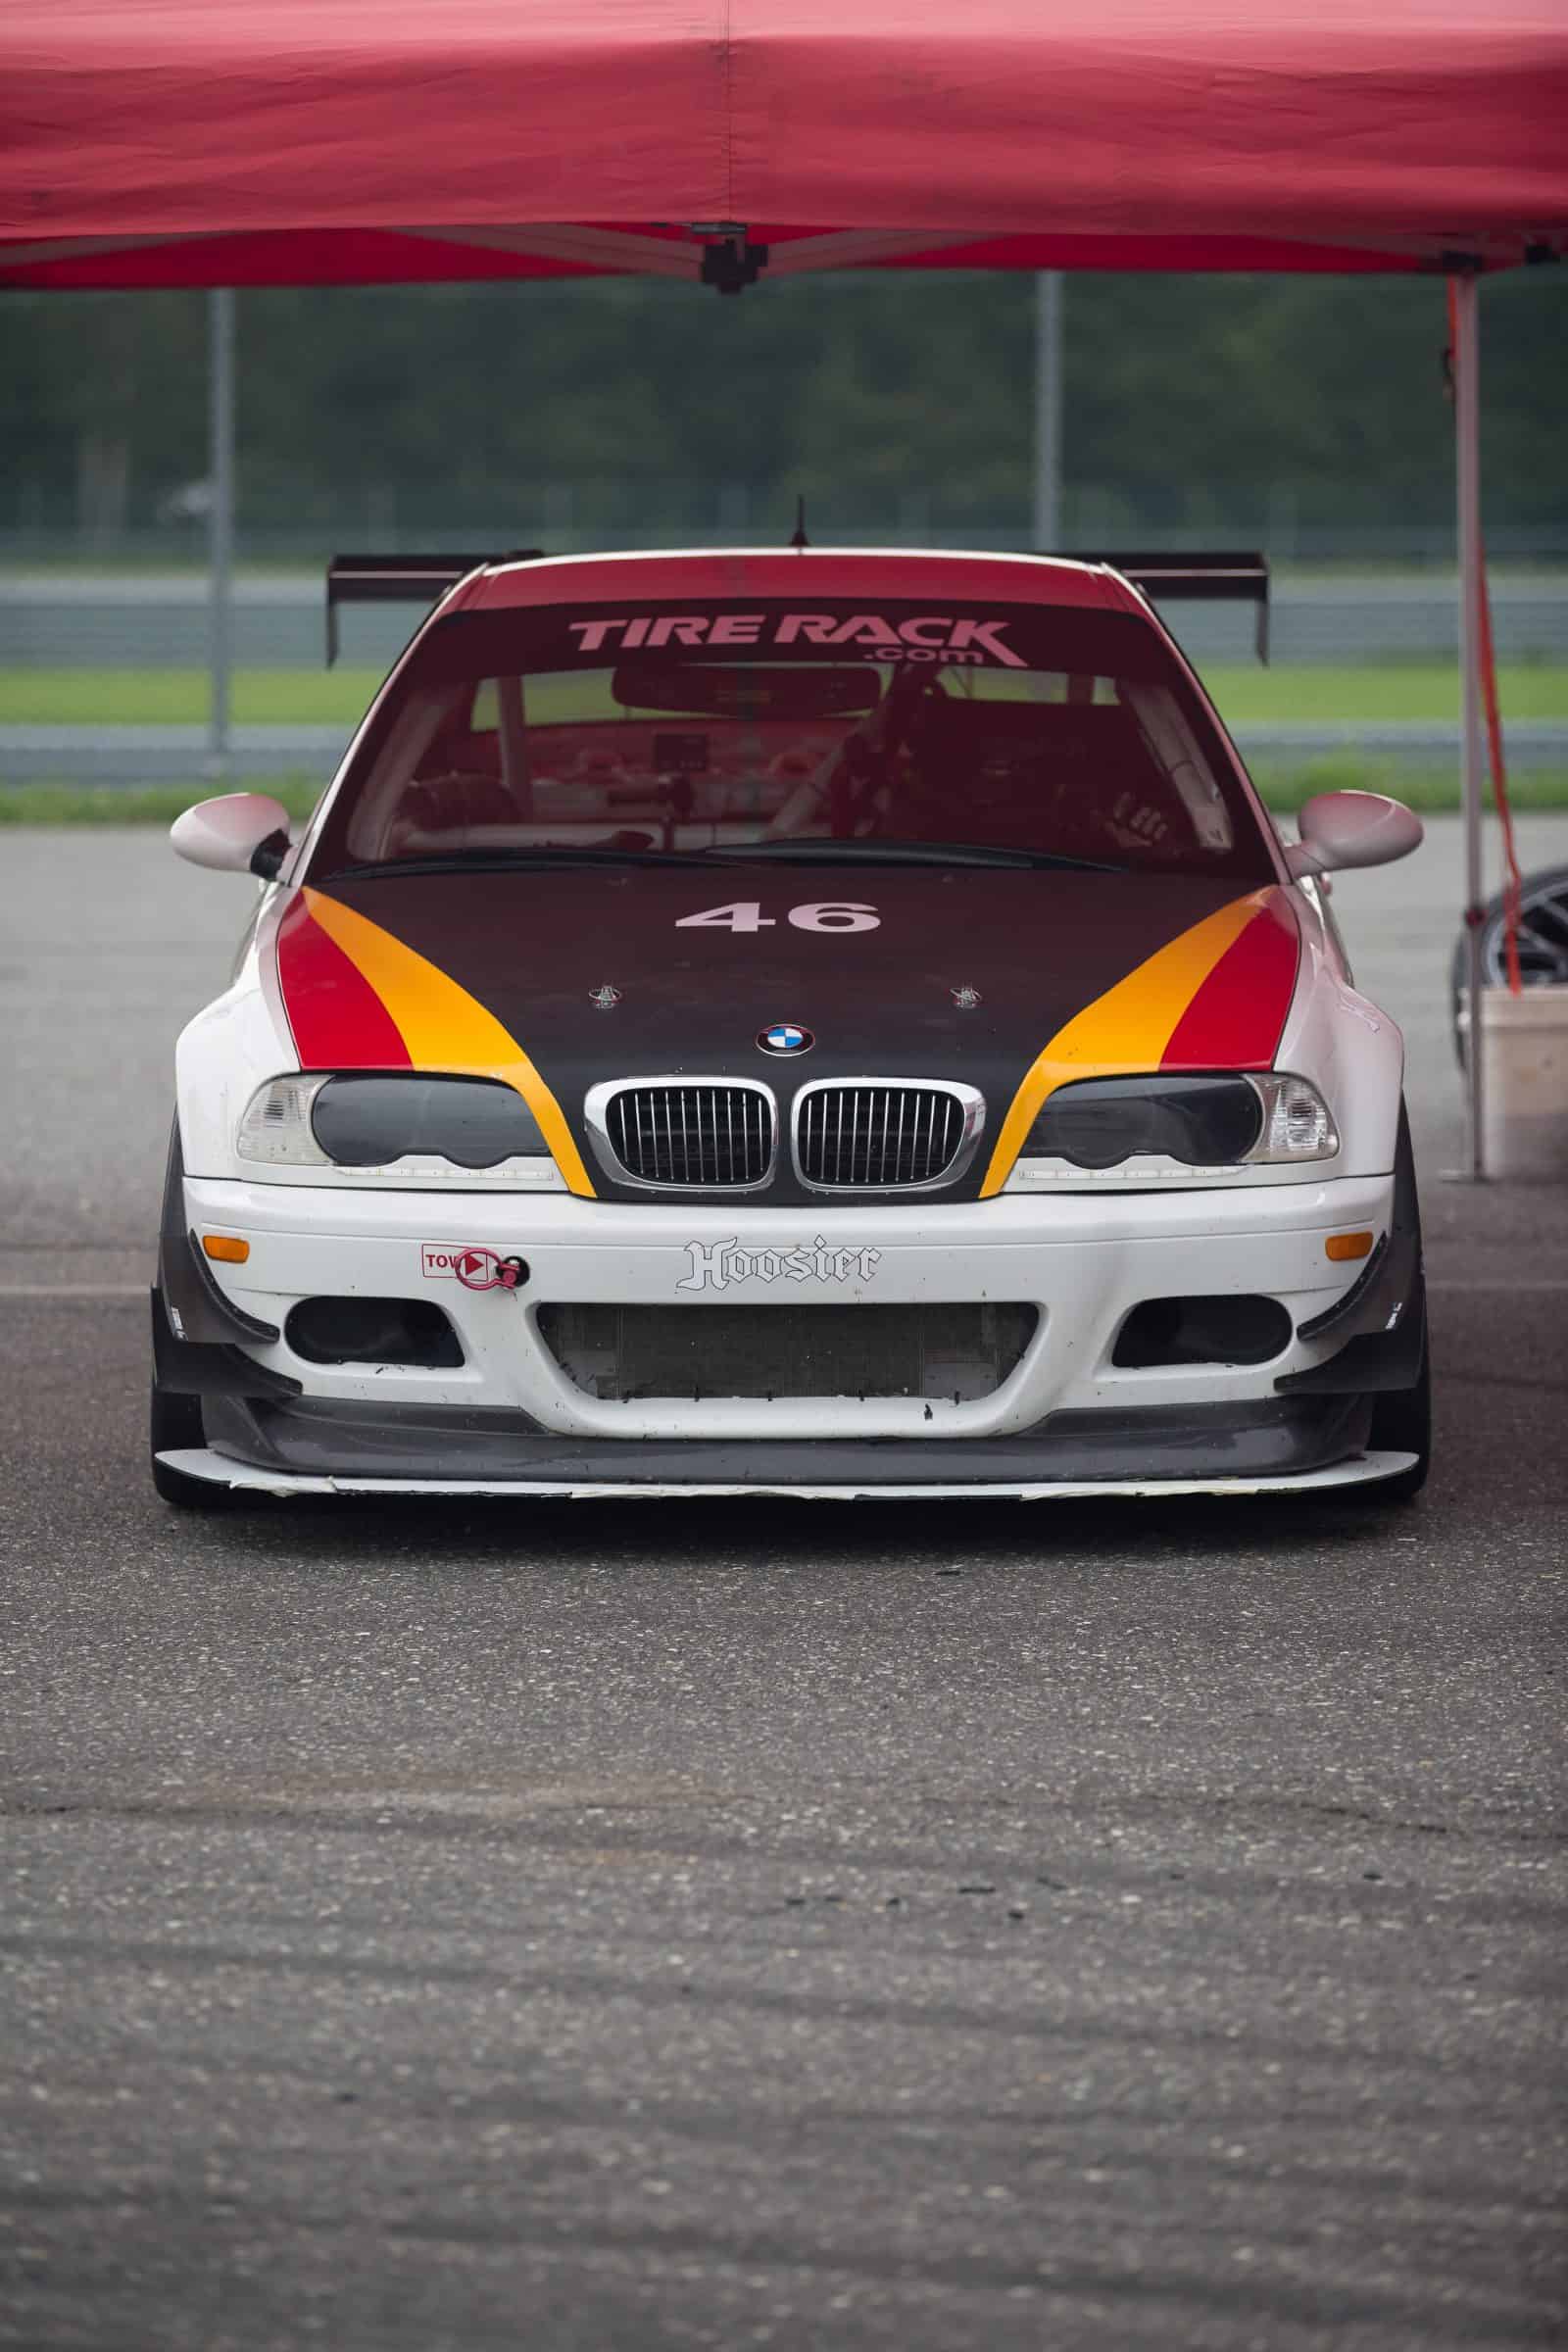 BMW awaiting track time for the DElval BMW at NJMP